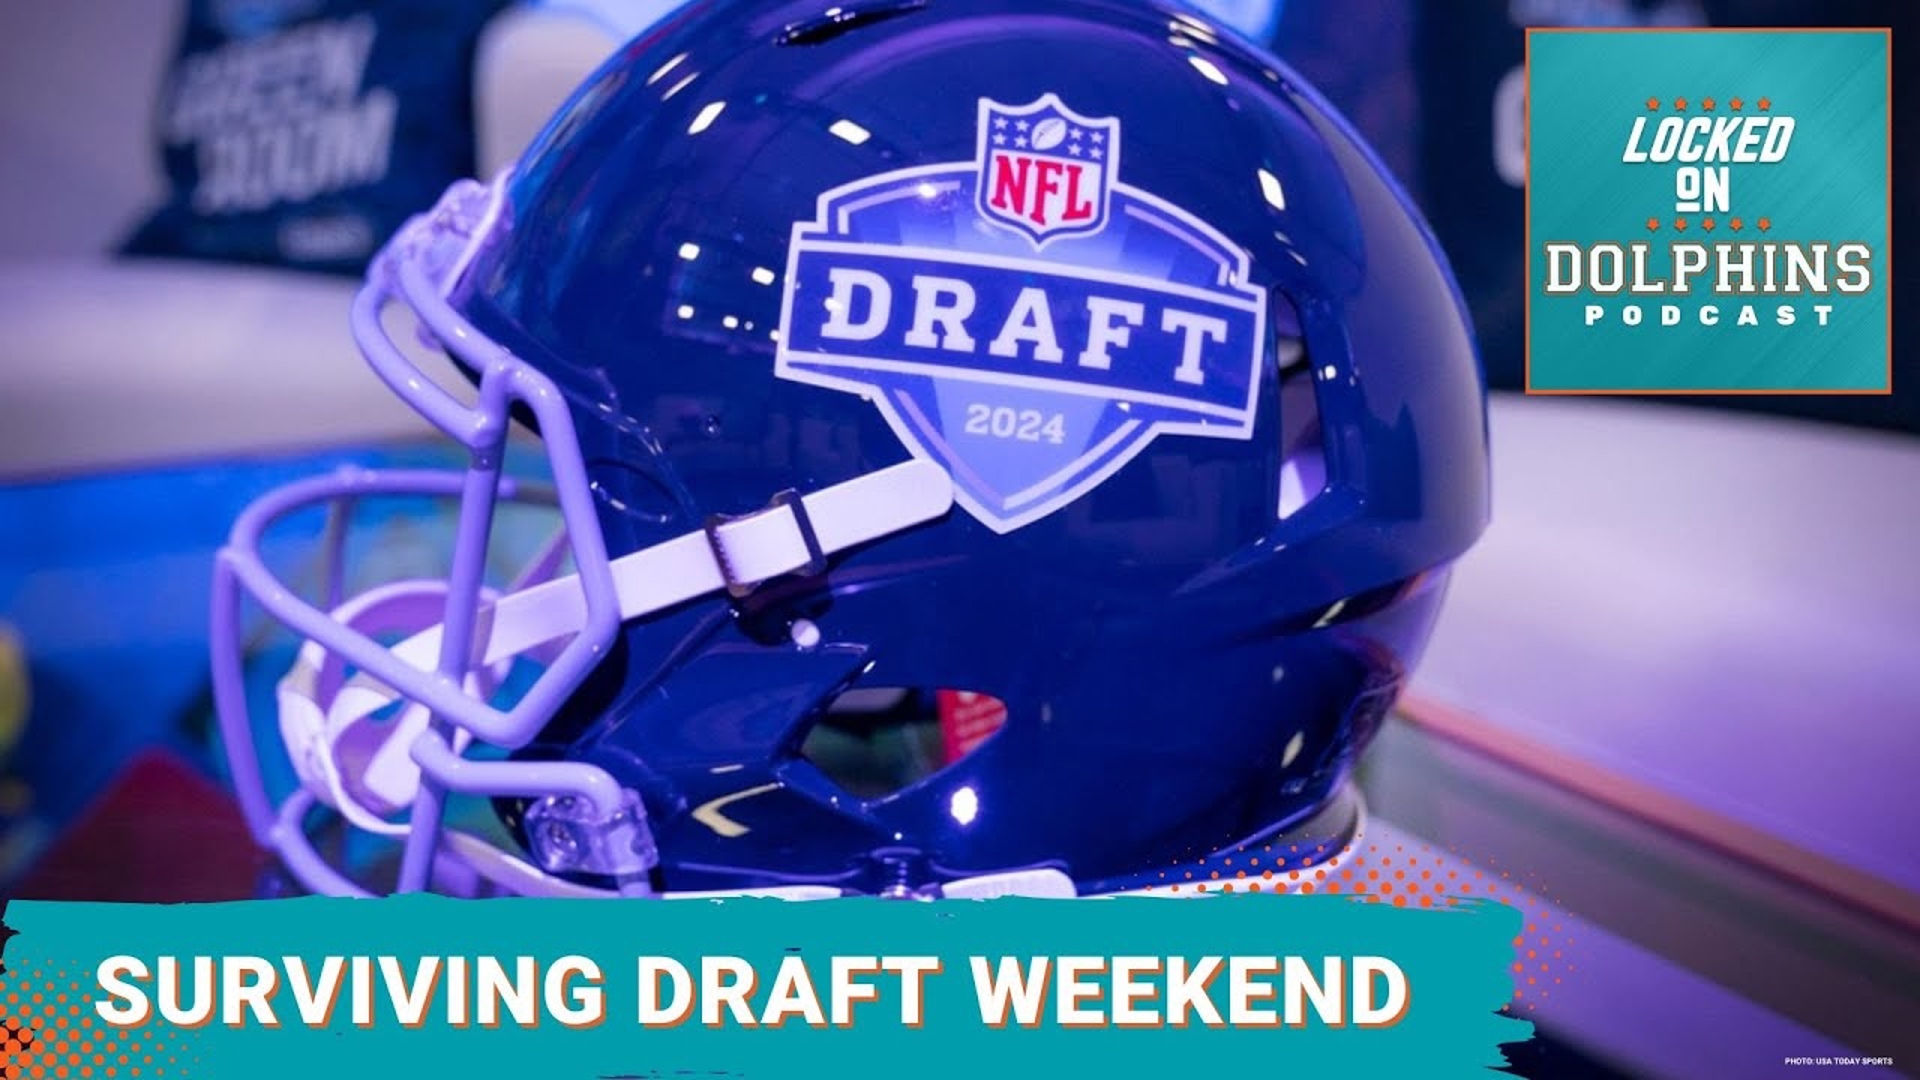 Congratulations, you made it! The 2024 NFL Draft is finally here. But what do you need to do in order to survive the weekend?